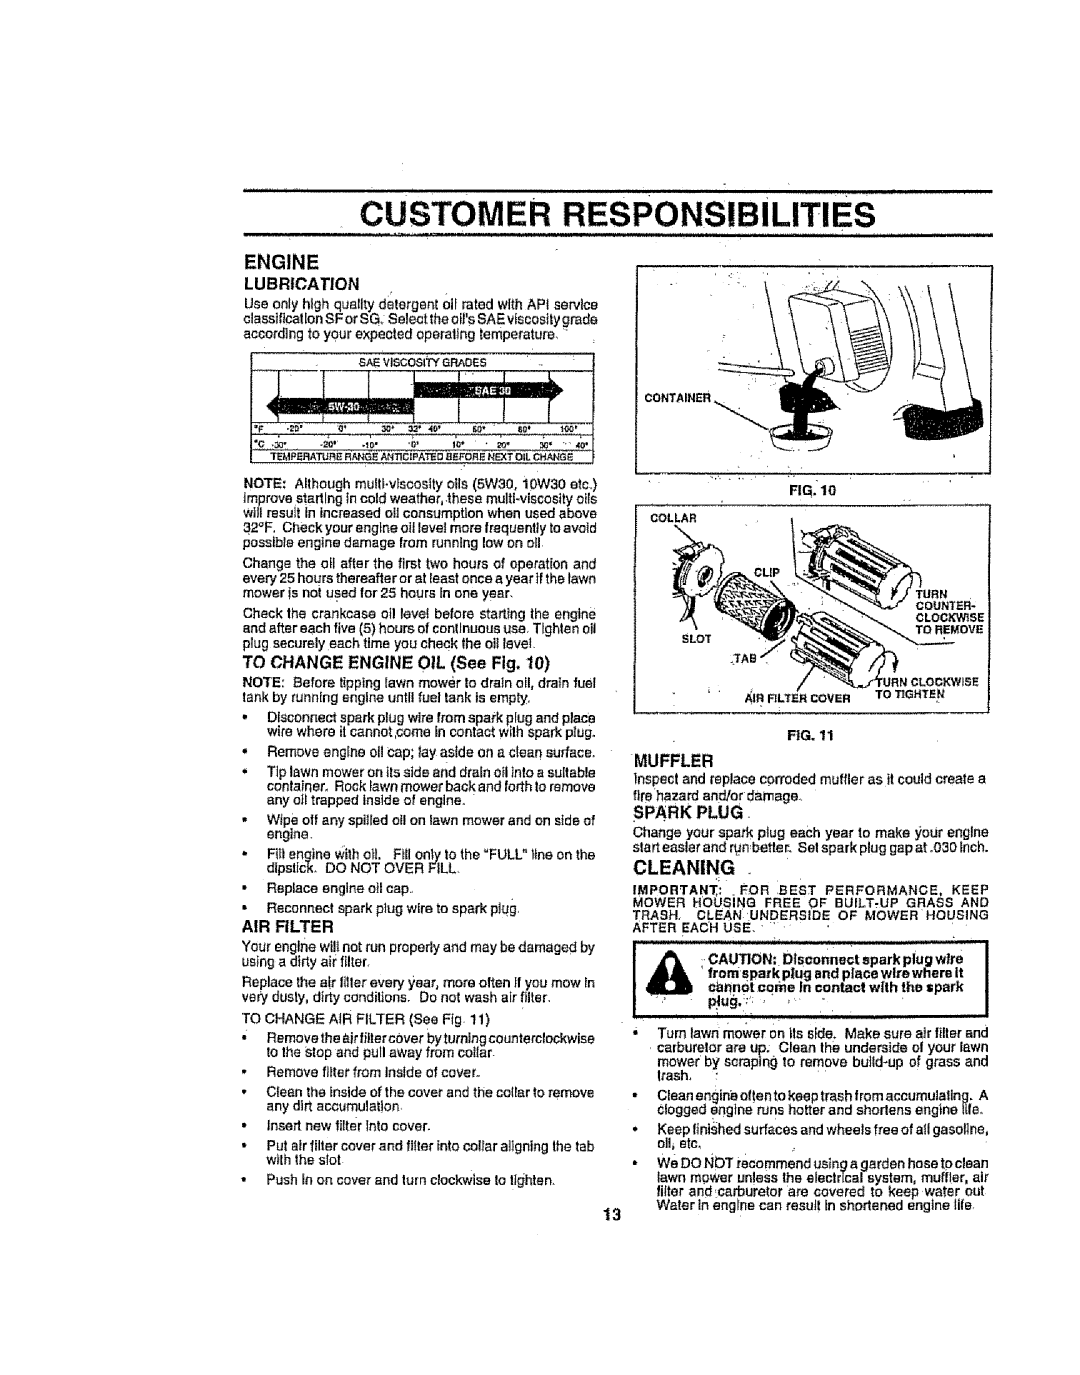 Sears 917386121 Customer Responsibilities, Engine, Cleaning, Lubrication, TO CHANGE ENGINE OIL See Fig, Air Filter 